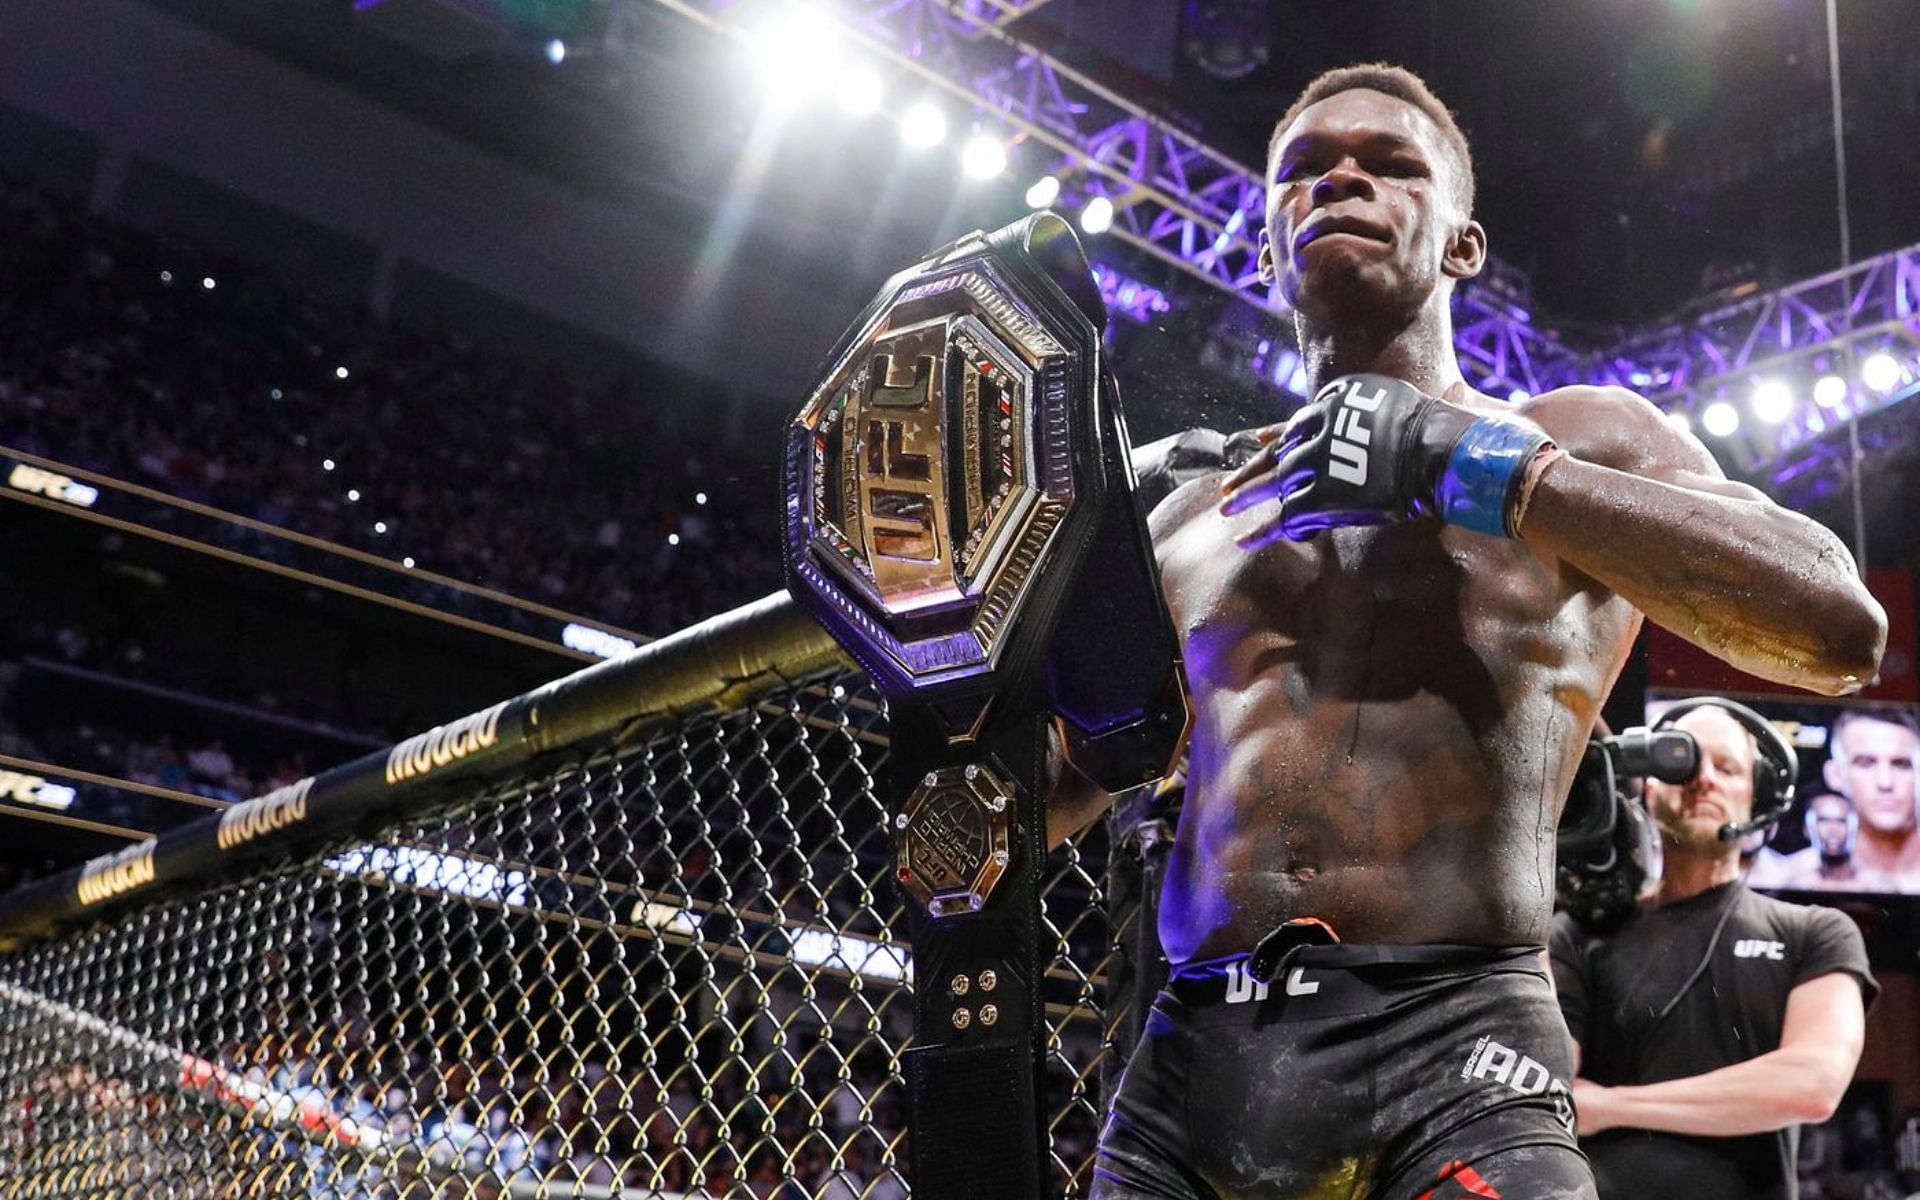 Could Israel Adesanya fight his old kickboxing rival Alex Pereira next if both men win this weekend?